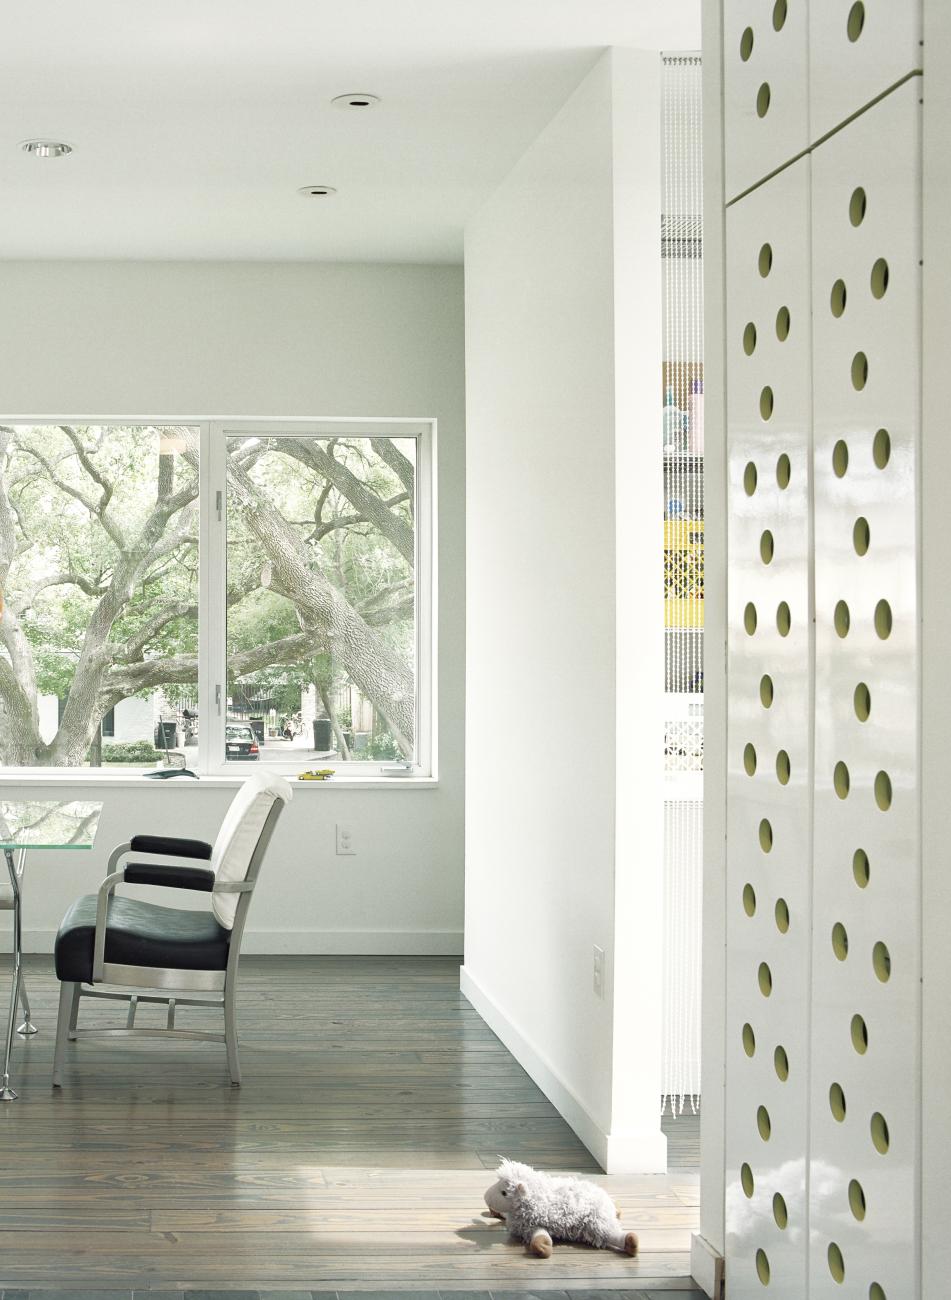 Custom brake-form perforated steel doors and concealed storage adjacent to dining area